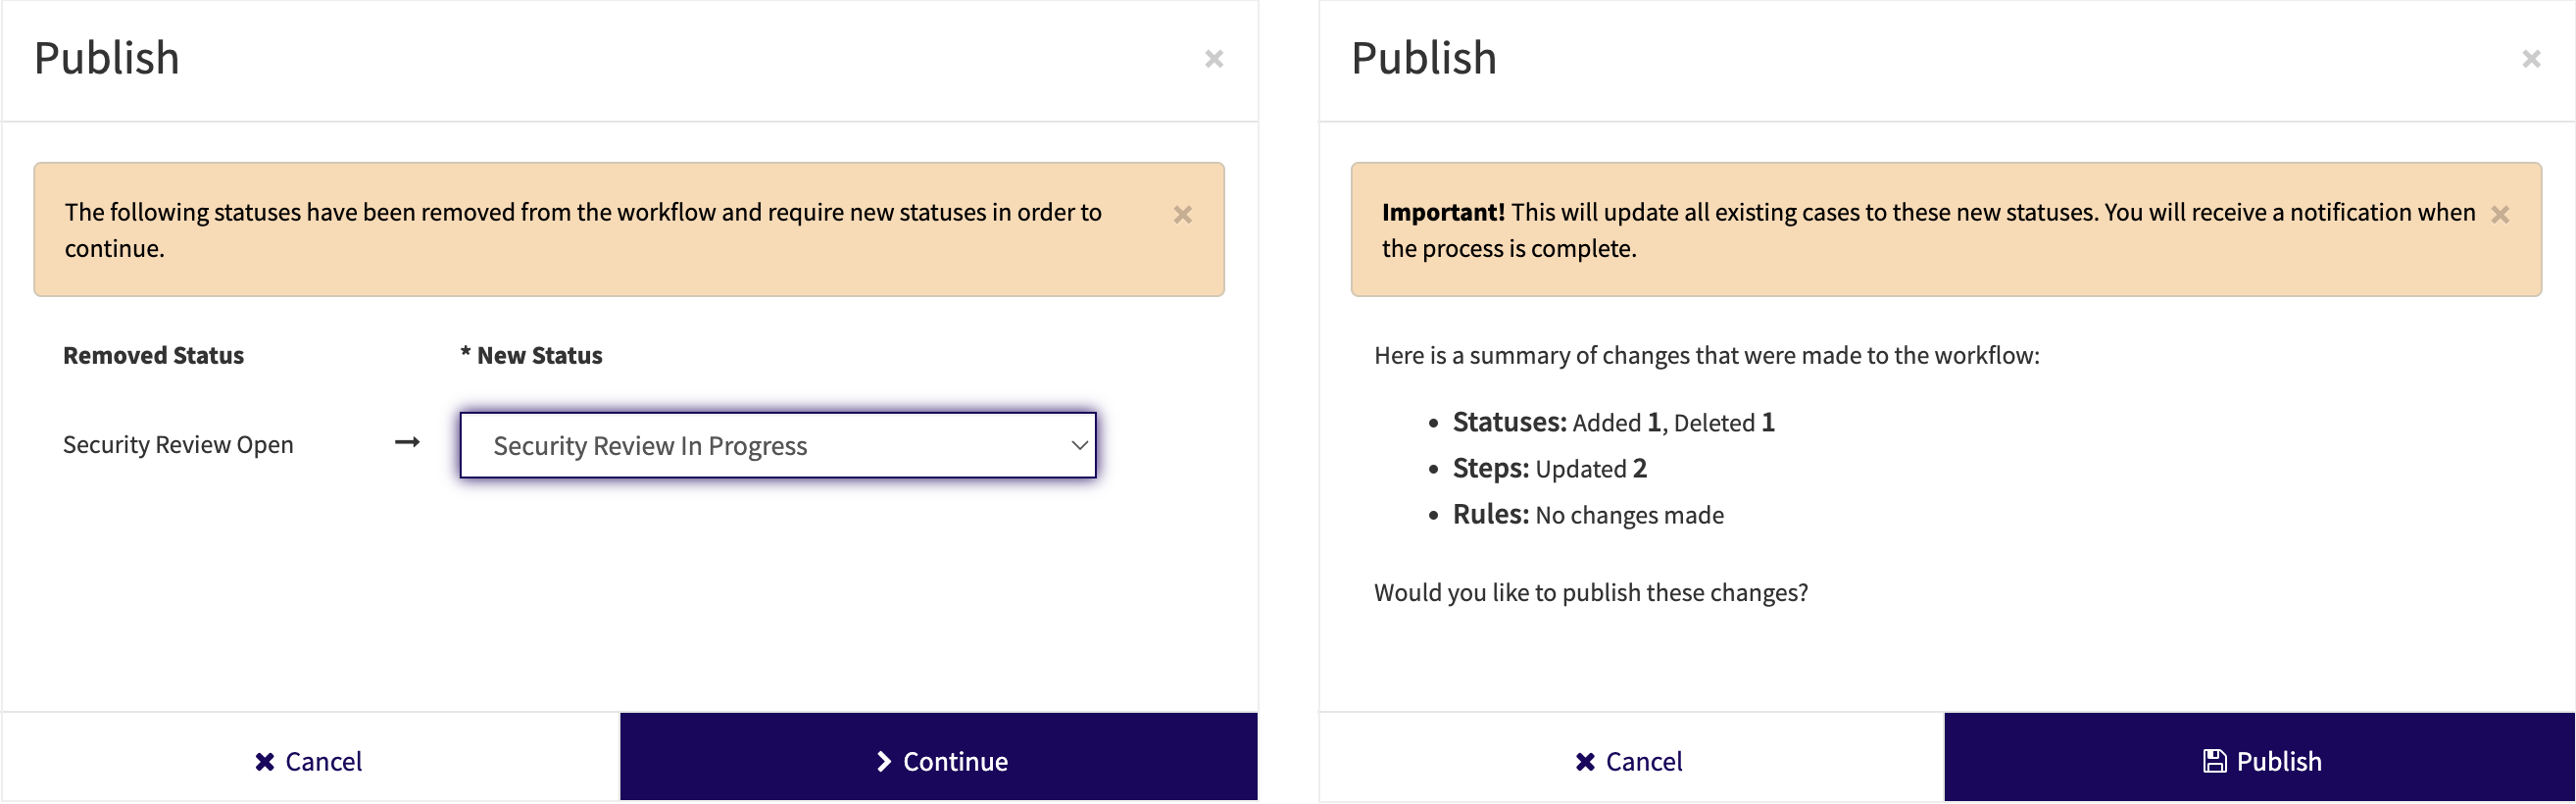 The Publish pop-up. Migrate cases out of deleted statuses before seeing a summary of the workflow changes.